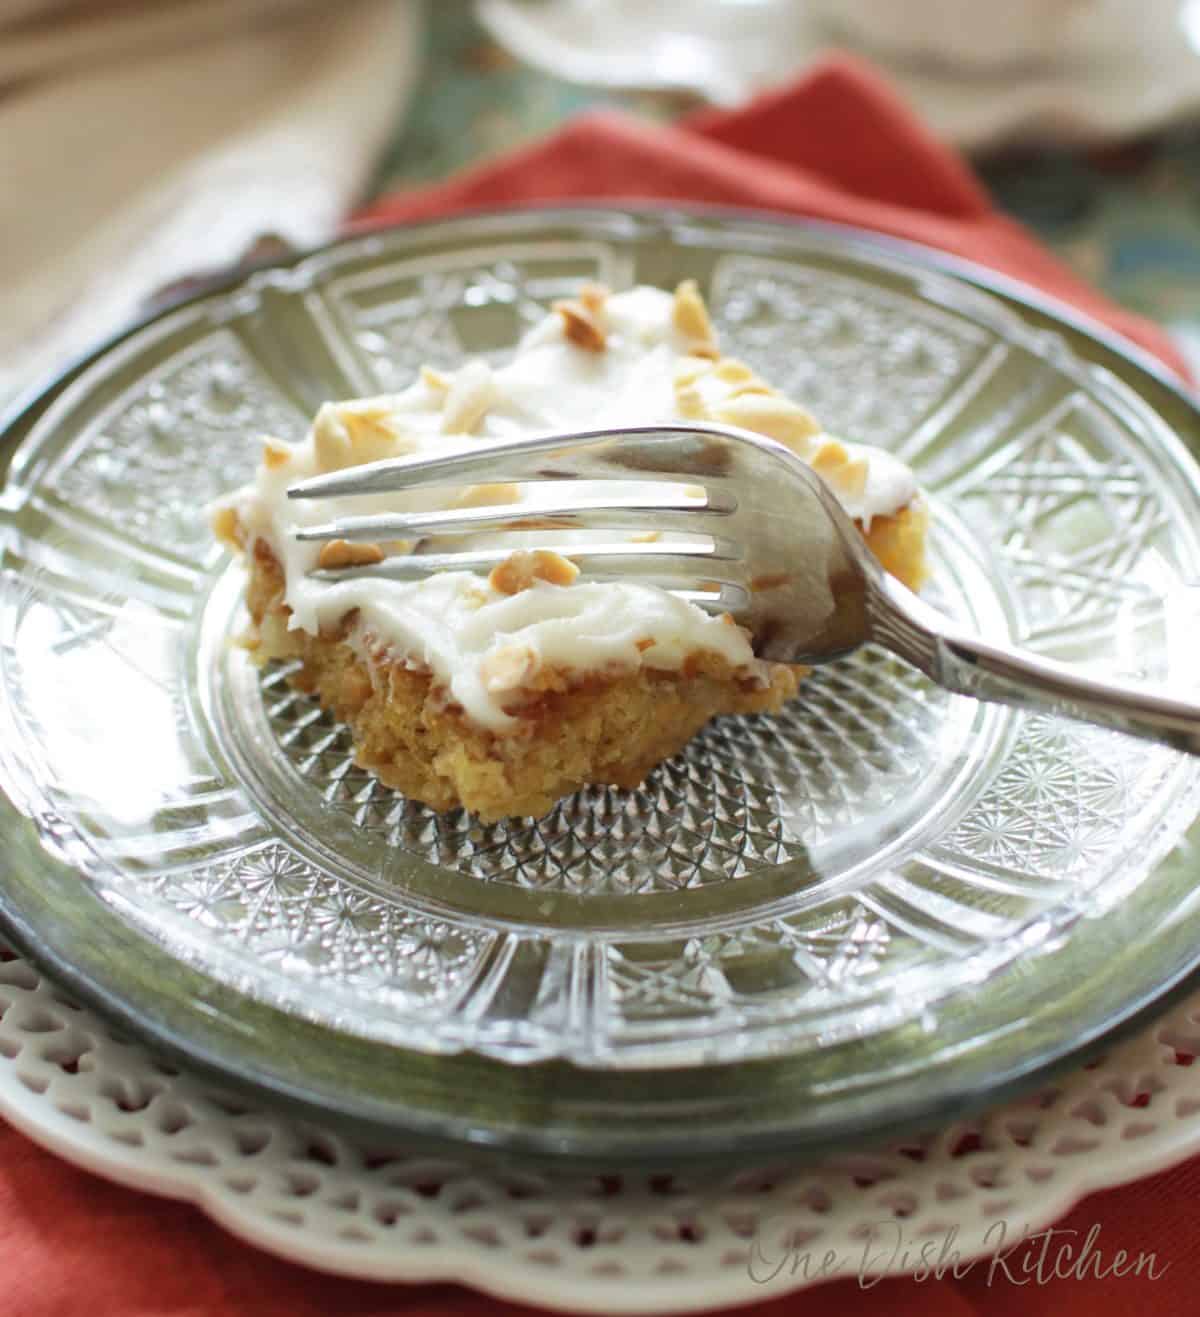 One slice of pineapple sheet cake topped with vanilla icing and chopped peanuts being eaten with a fork on a clear plate.